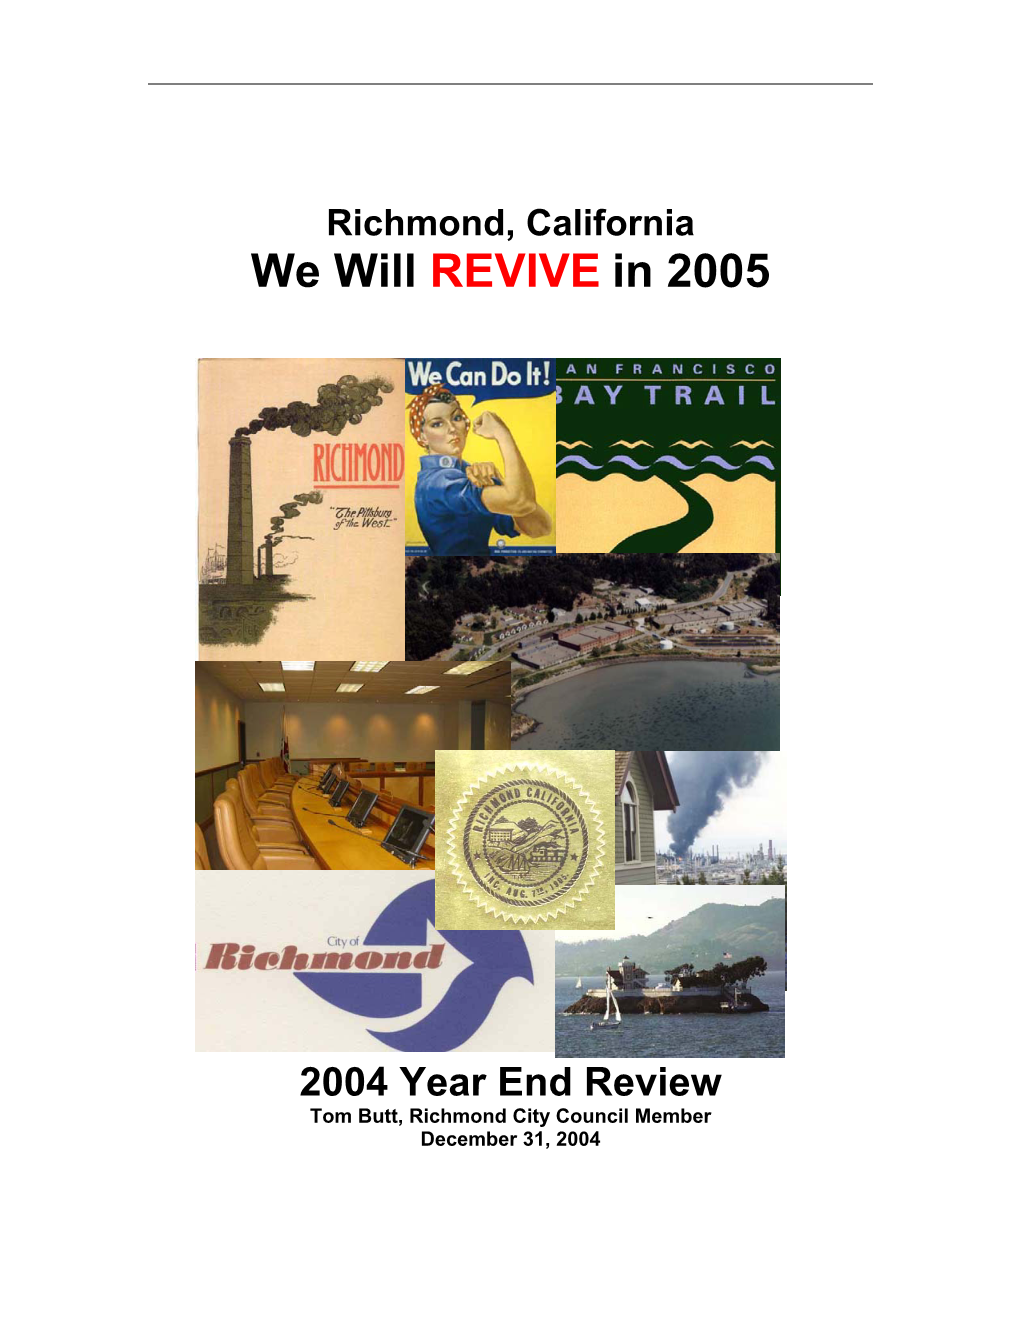 Richmond, California We Will REVIVE in 2005 2004 Year End Review